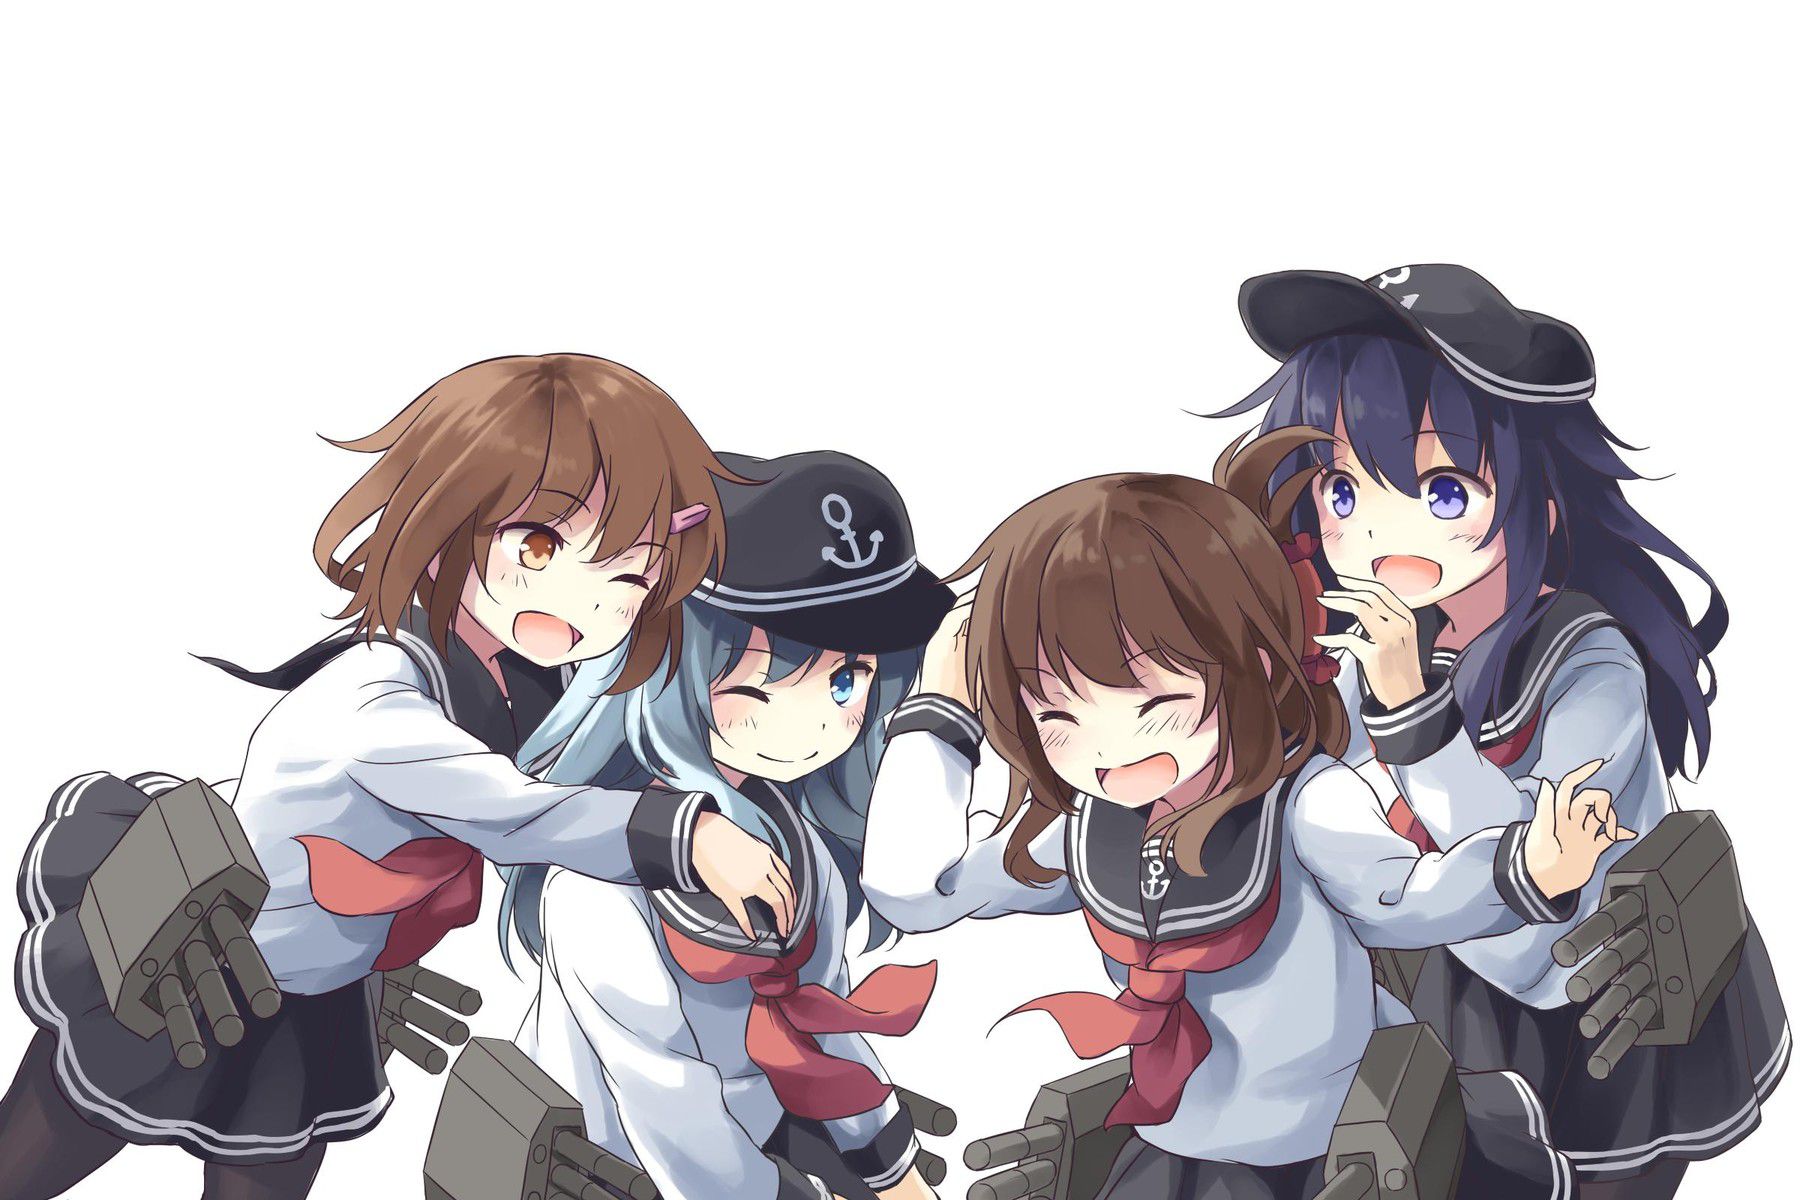 [Image] "ship this ' of warship daughter sexy cuteness is abnormal wwwwwwwwwwww 29